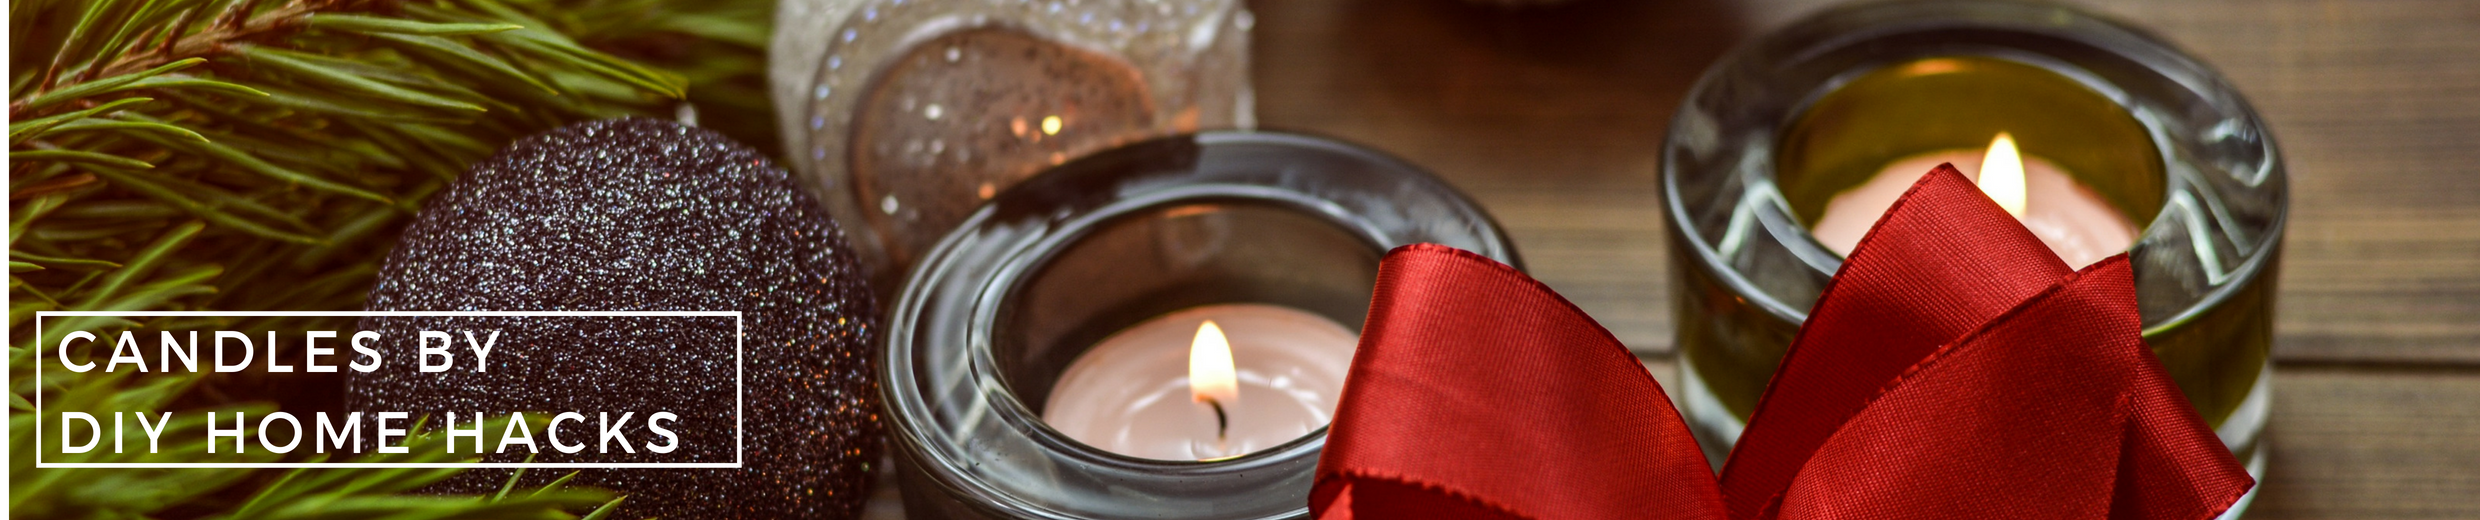 warm candles for your home